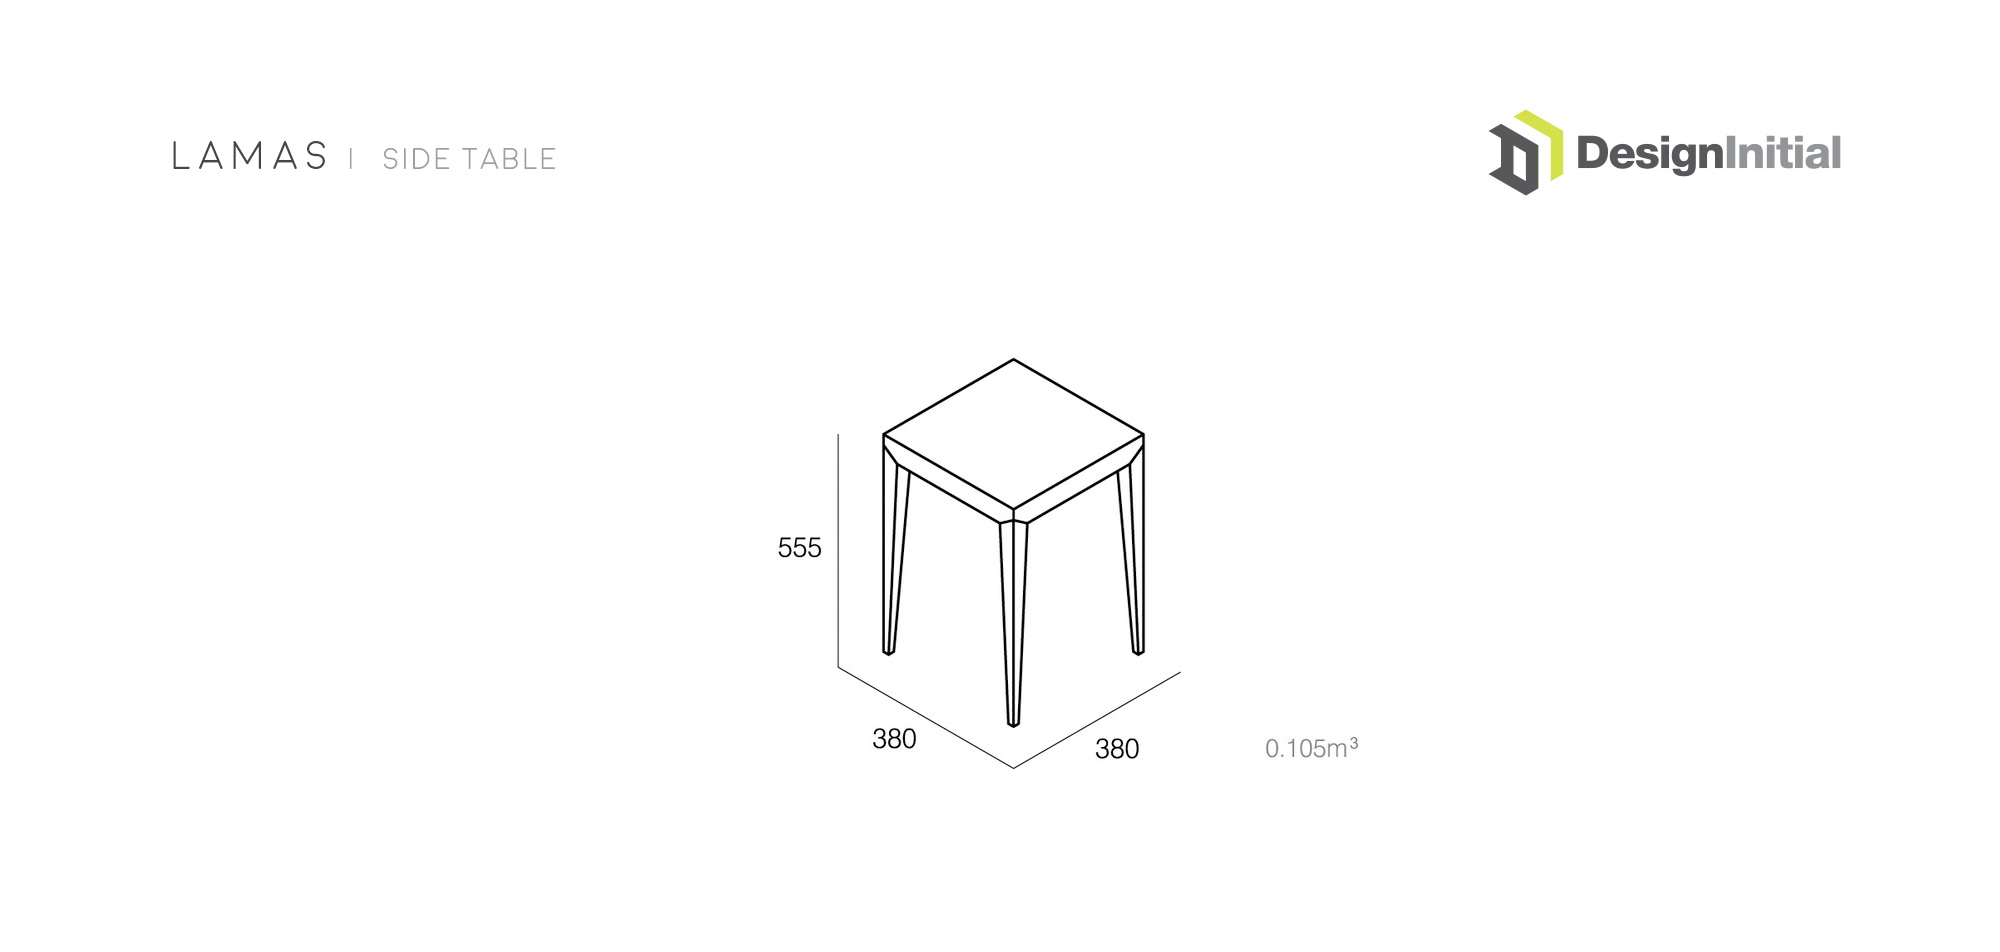 Lamas Side Table Specifications